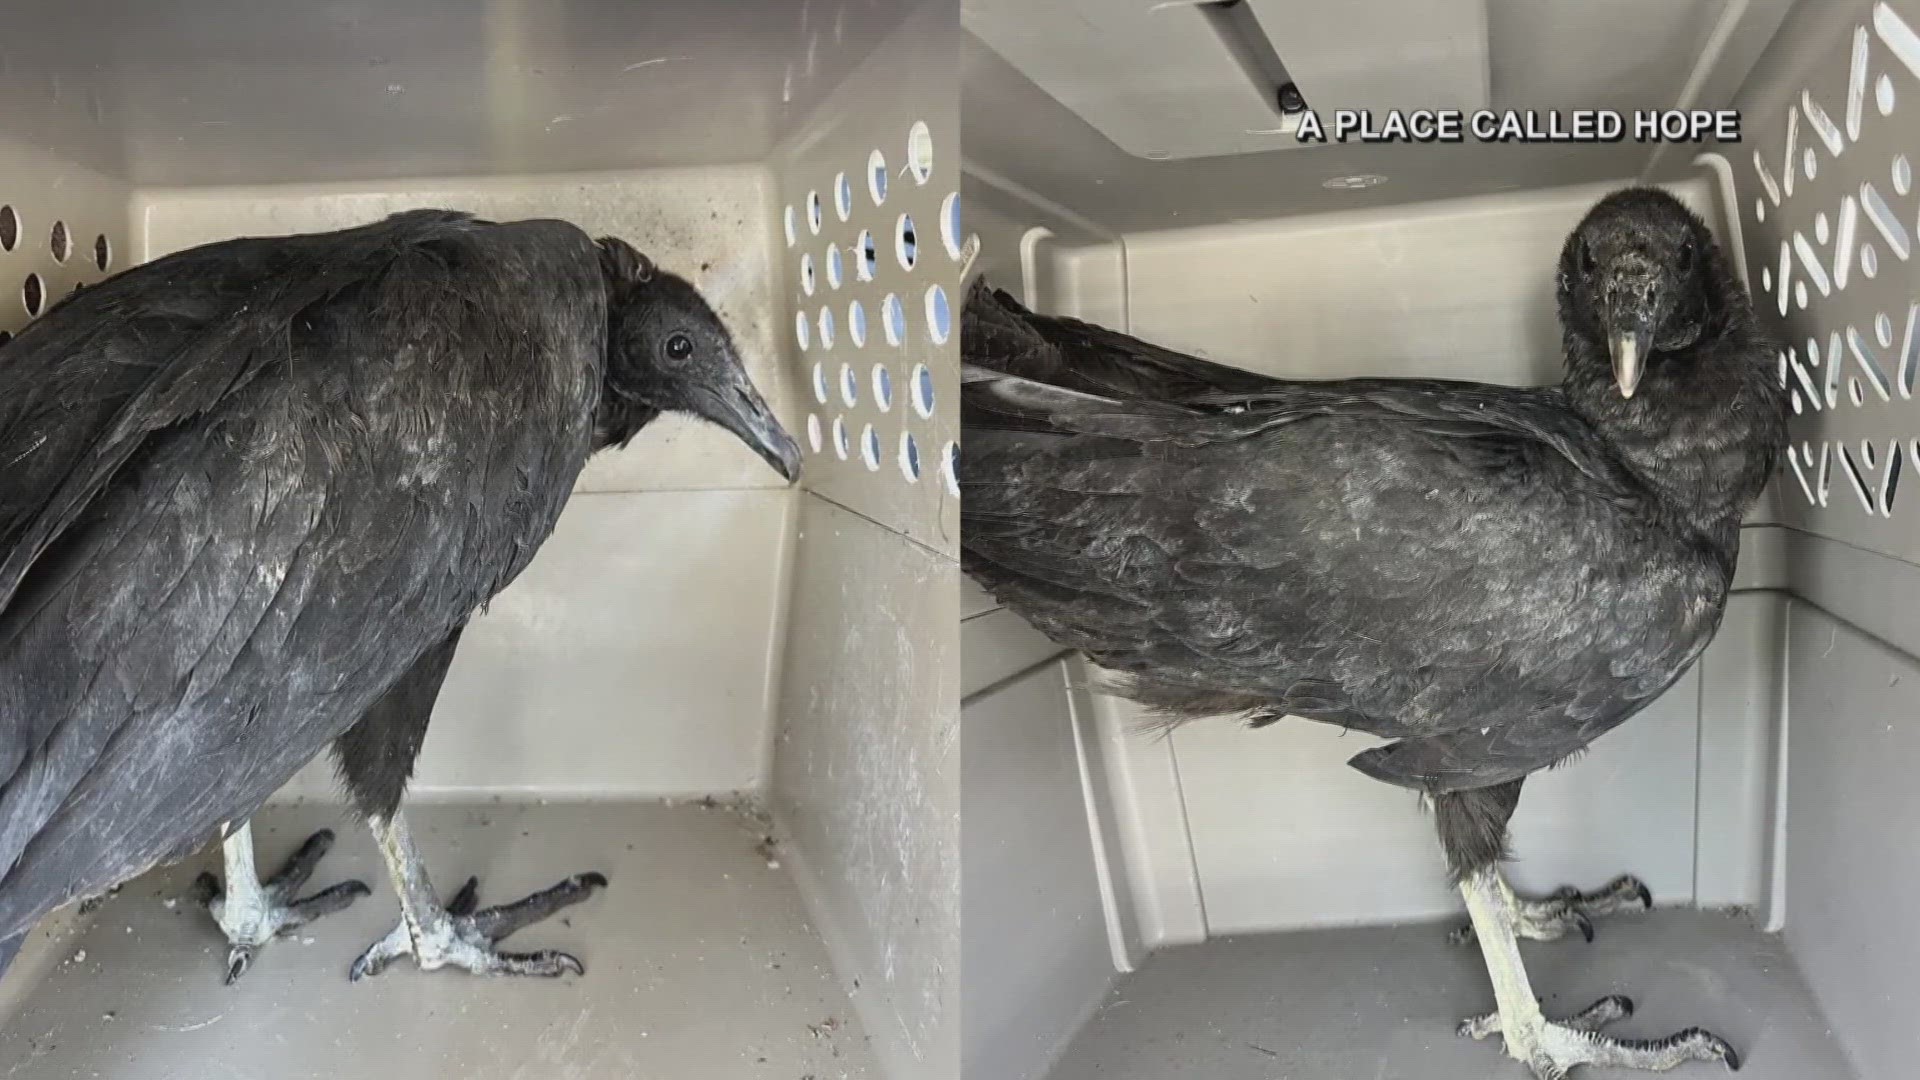 A wildlife facility picked up the vultures, who they said appeared to be dying, but after some tests, they discovered the birds were just drunk.